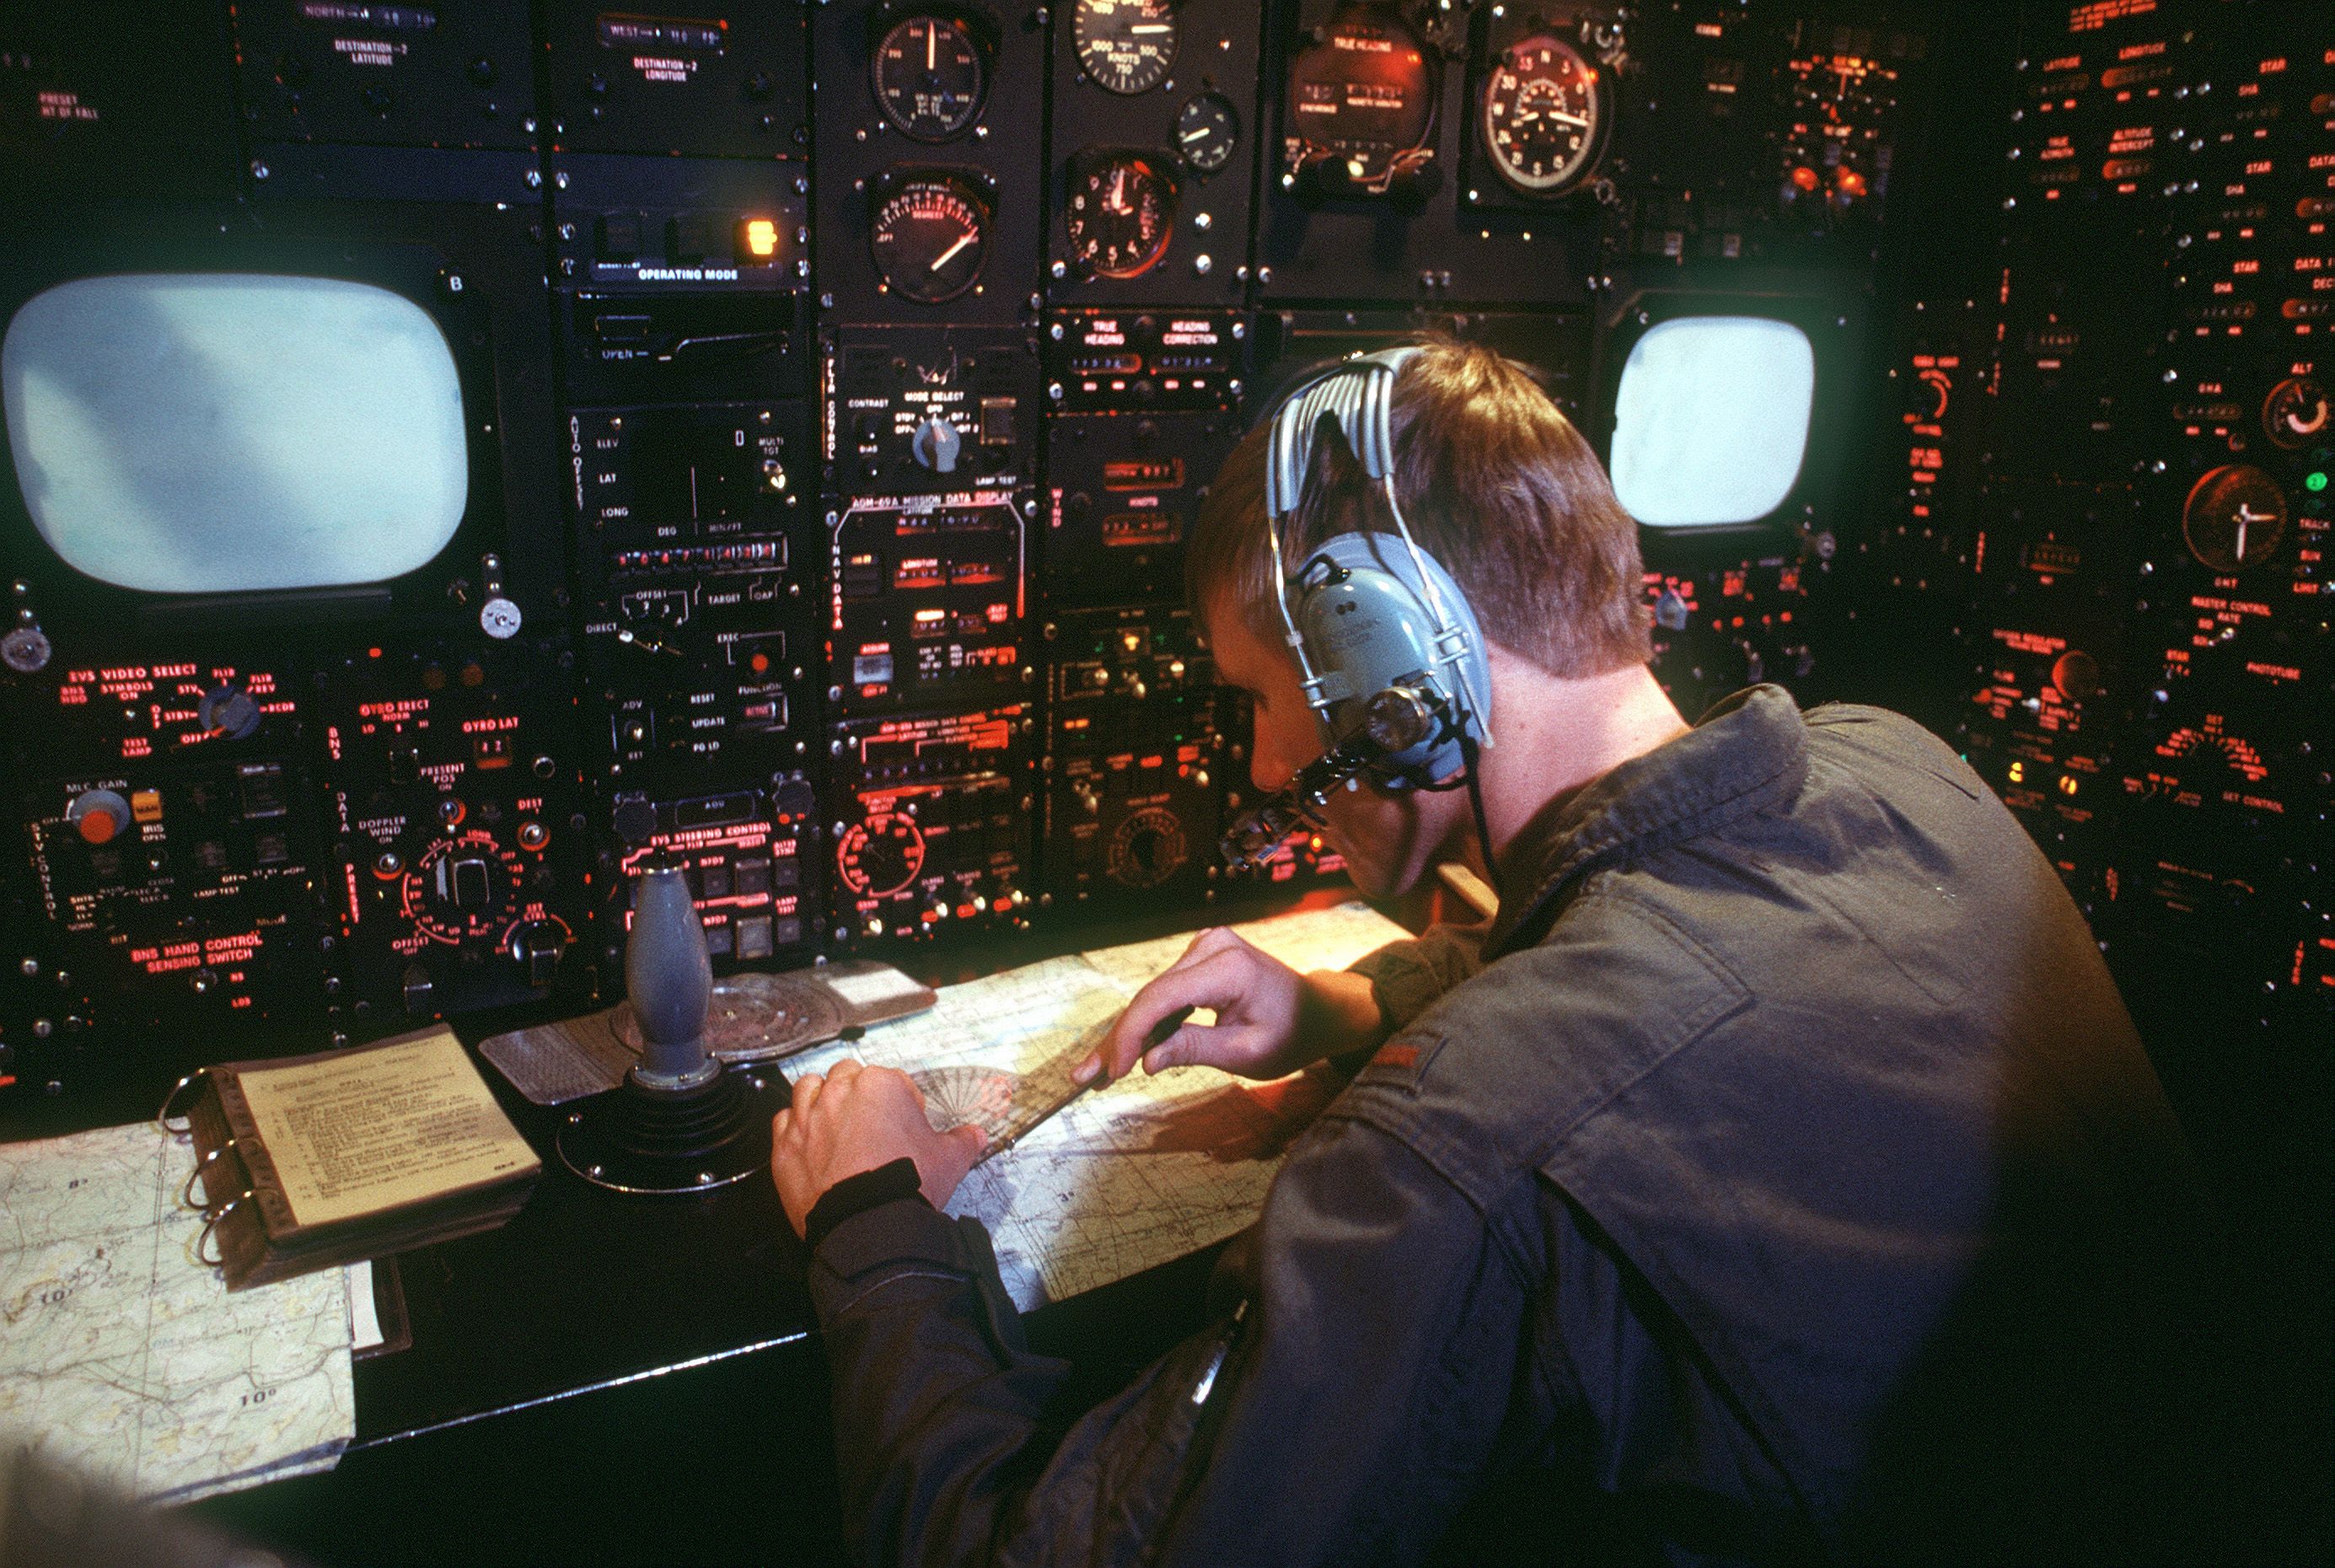 “A student enrolled in the Air Training Command Undergraduate Navigator Course uses a T45 navigational simulator system during a class. The T45 uses high-speed computers to provide a realistic ground-based simulation of a wide variety of navigational situations.”